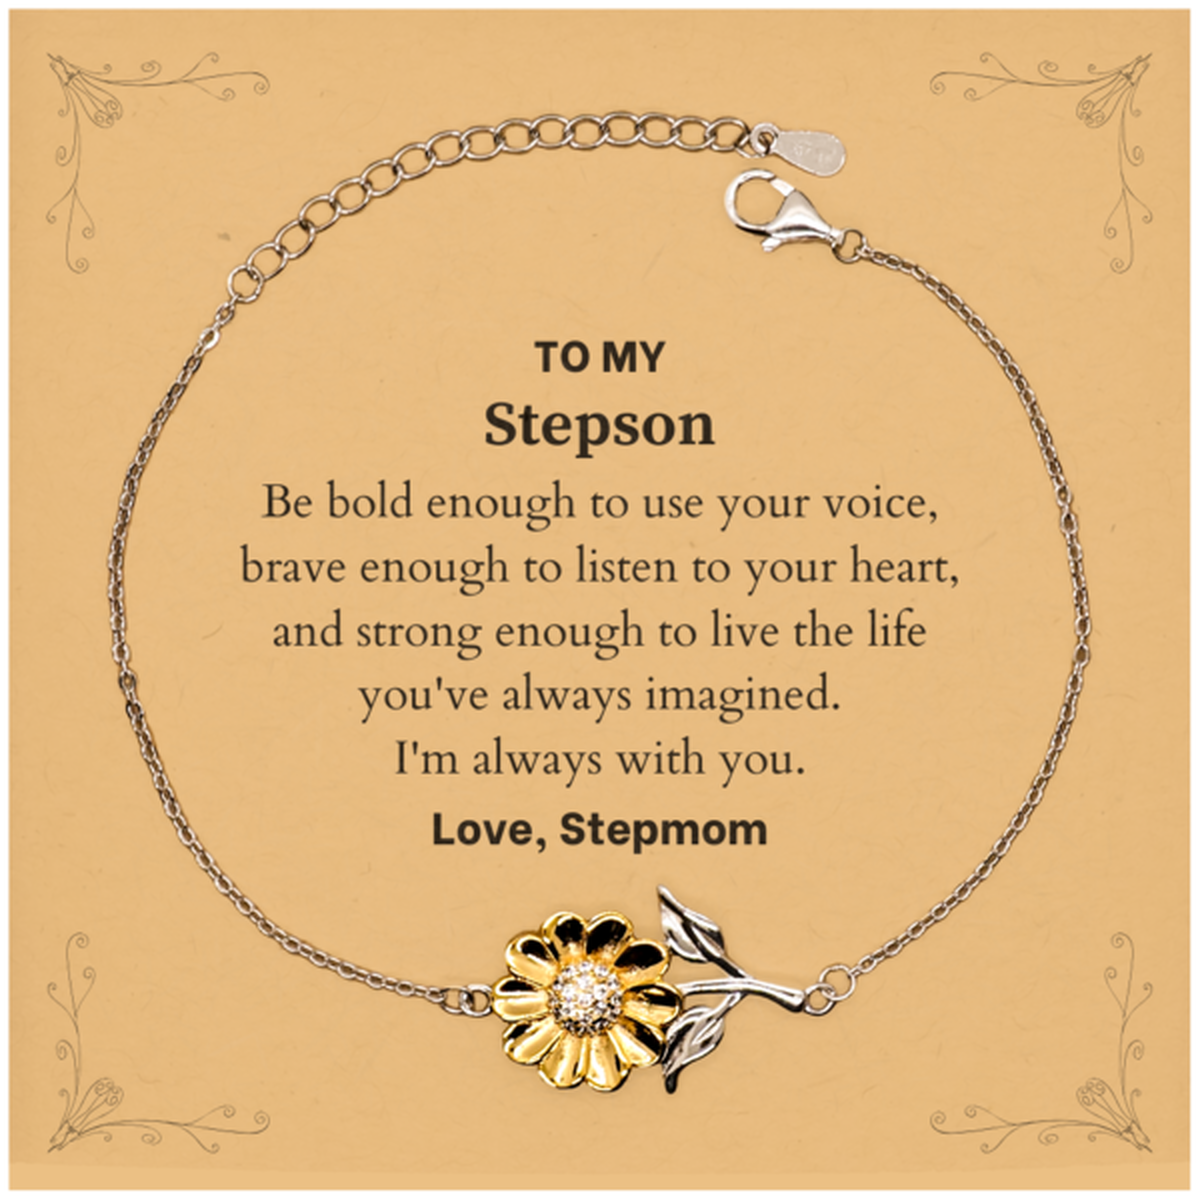 Keepsake Stepson Sunflower Bracelet Gift Idea Graduation Christmas Birthday Stepson from Stepmom, Stepson Be bold enough to use your voice, brave enough to listen to your heart. Love, Stepmom